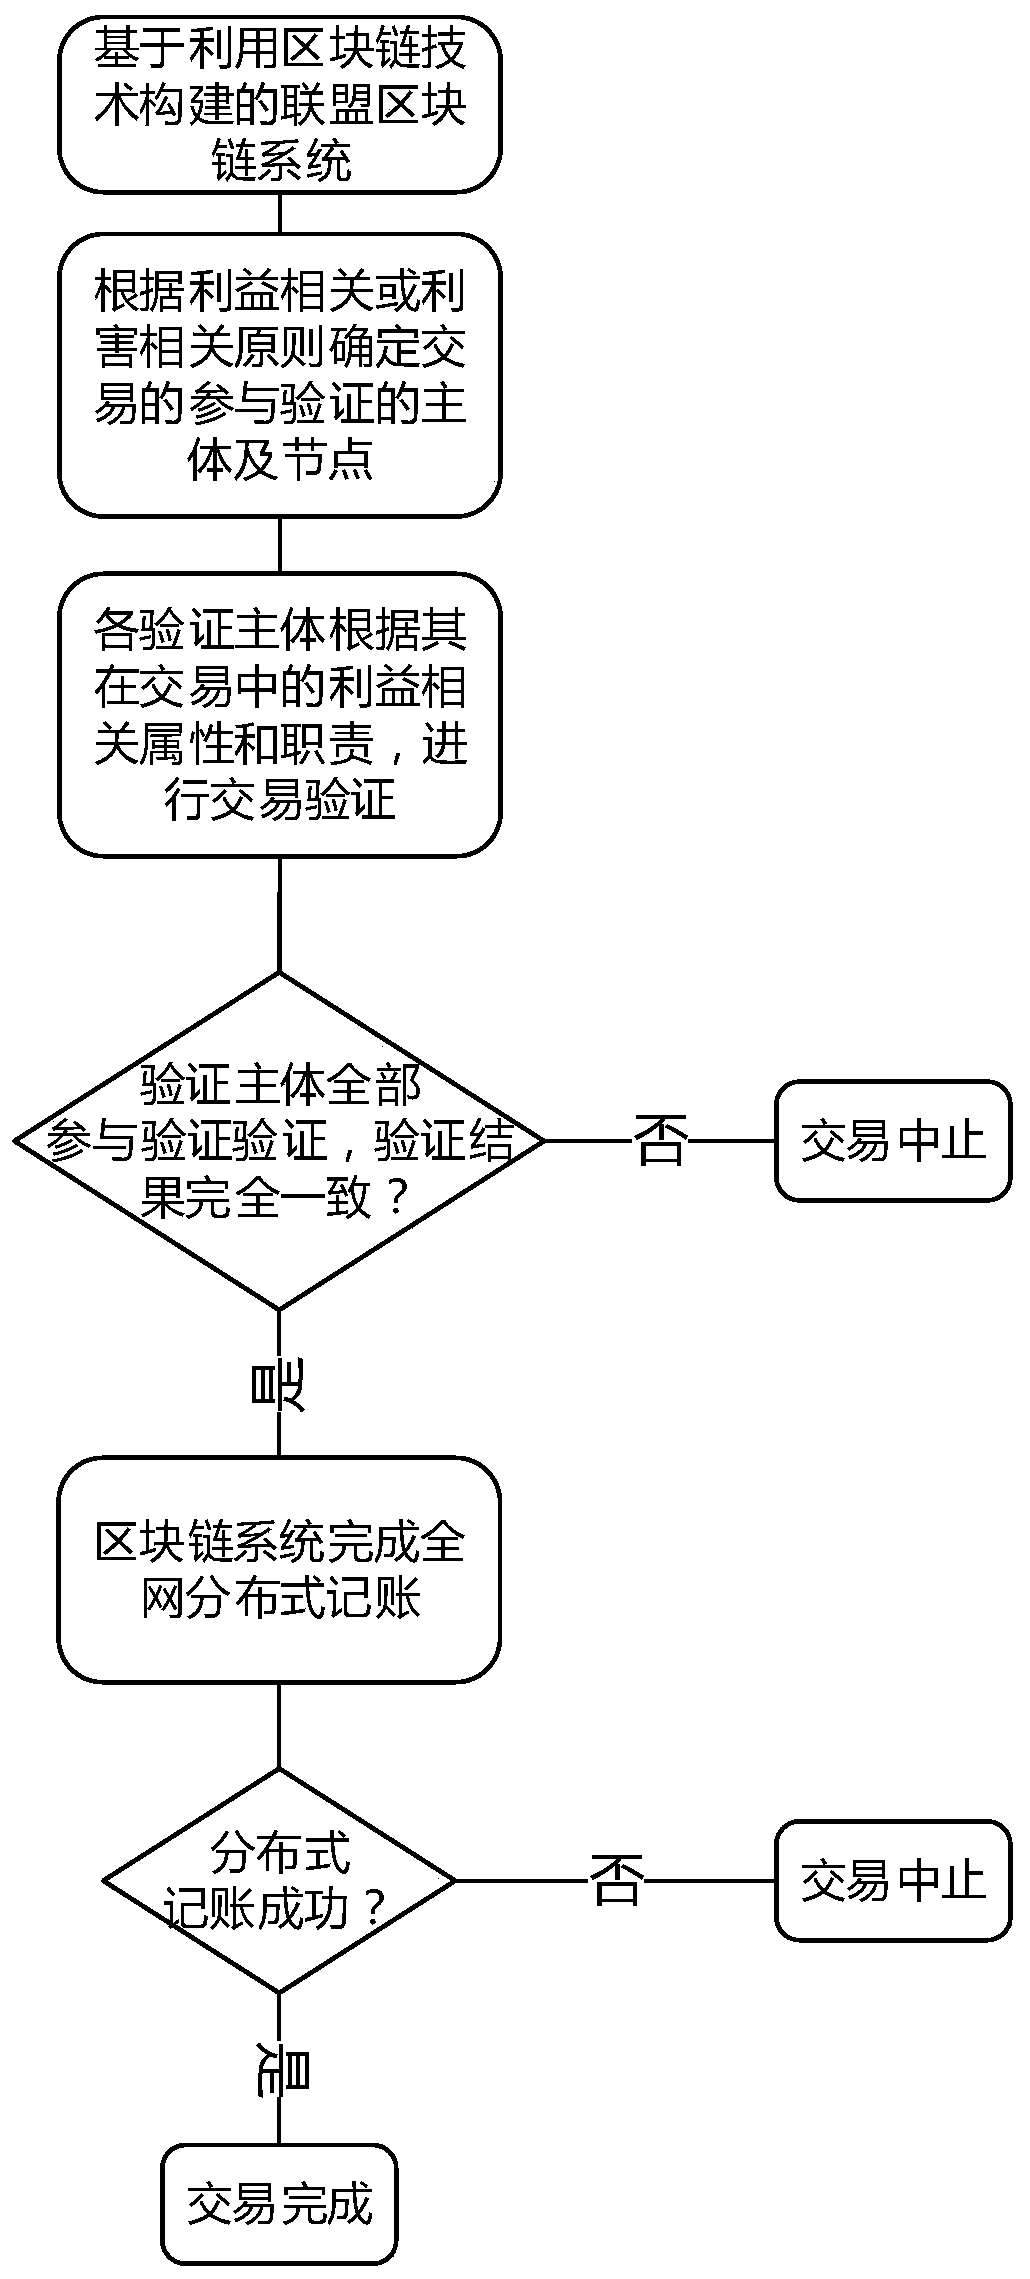 Transaction realization method in alliance block chain system